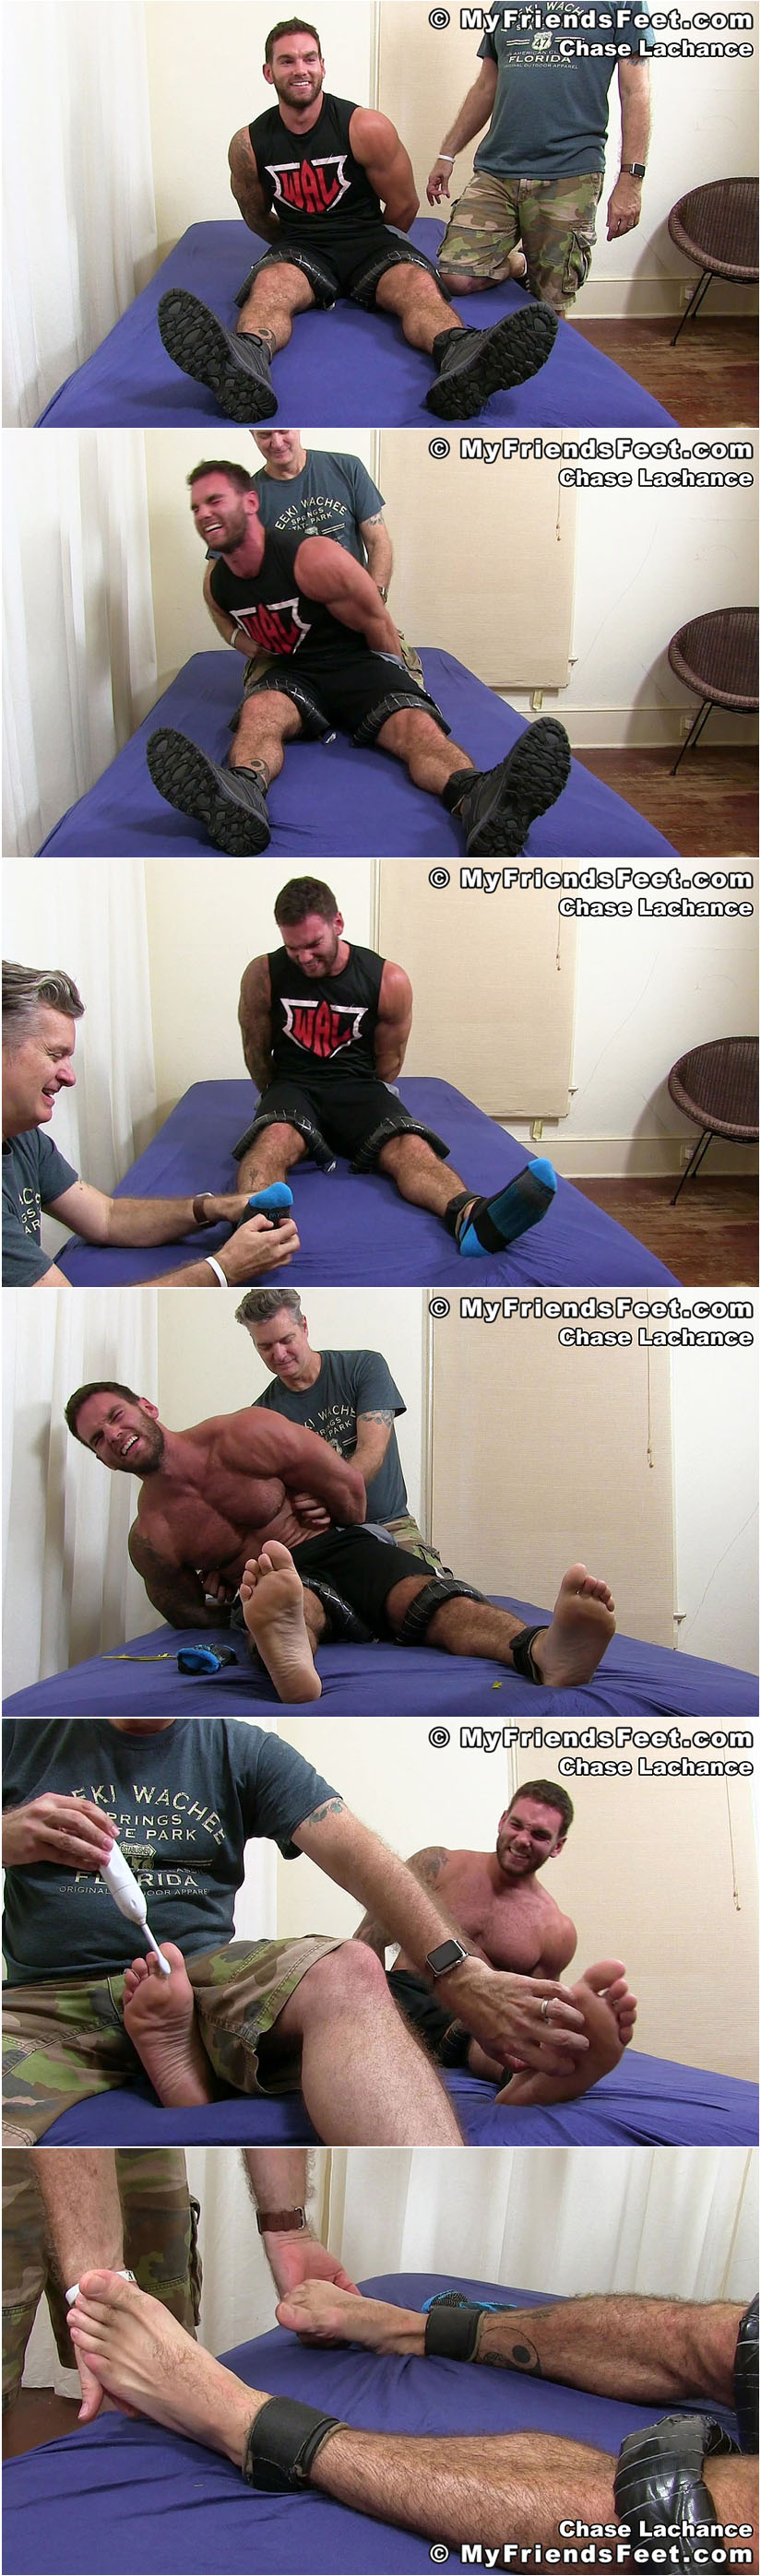 Gay porn star Chase Lachance feet restrained and tickled